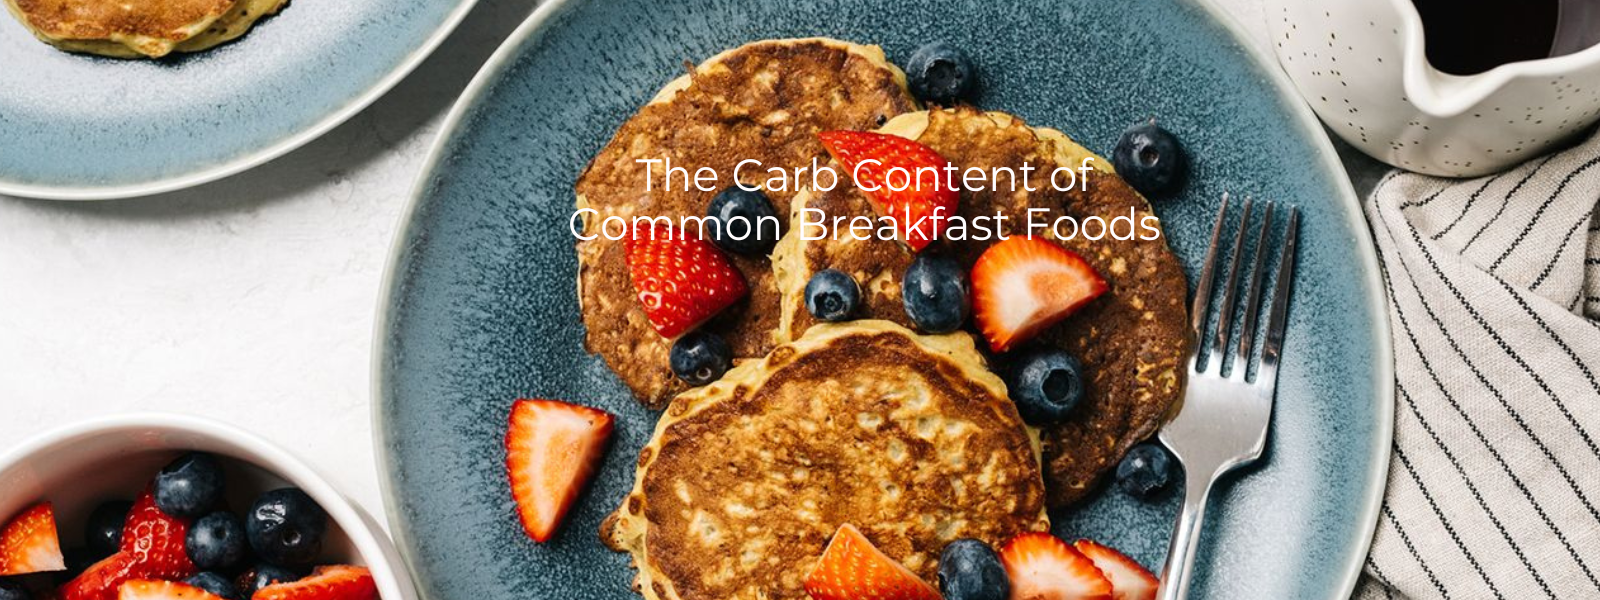 The Carb Content of Common Breakfast Foods